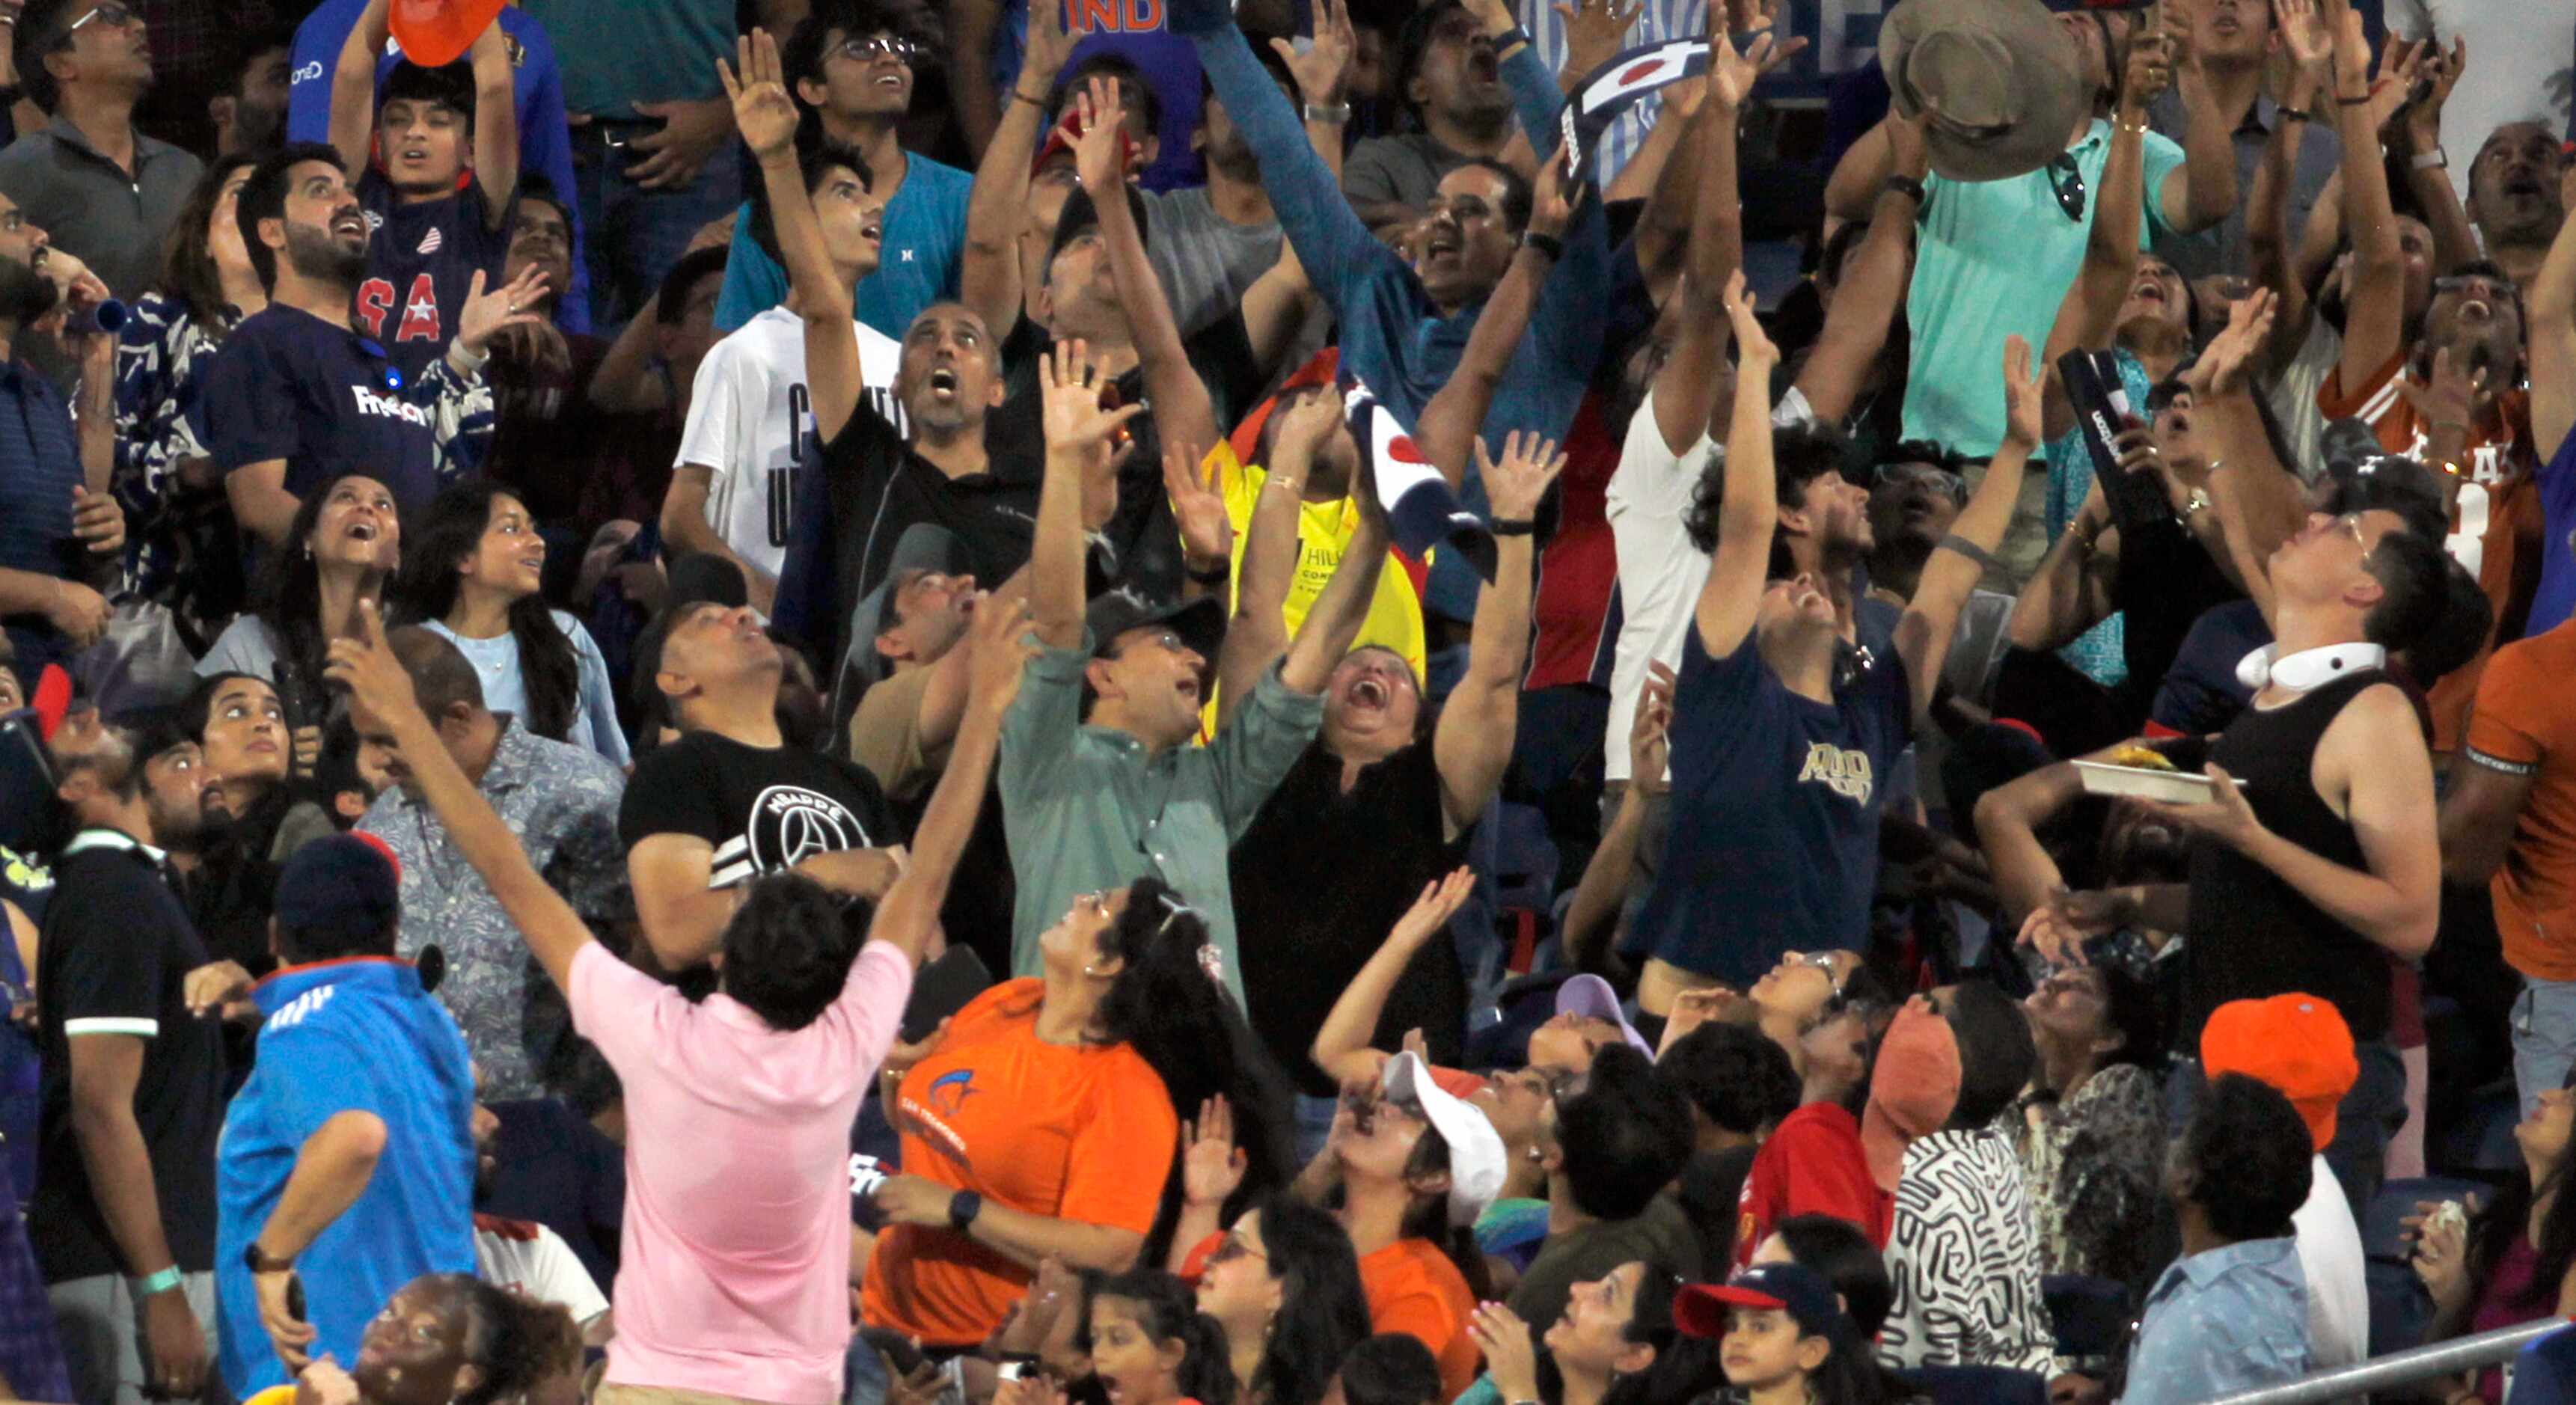 Cricket fans track a long fly ball that sailed into the stands from the wicket of a...